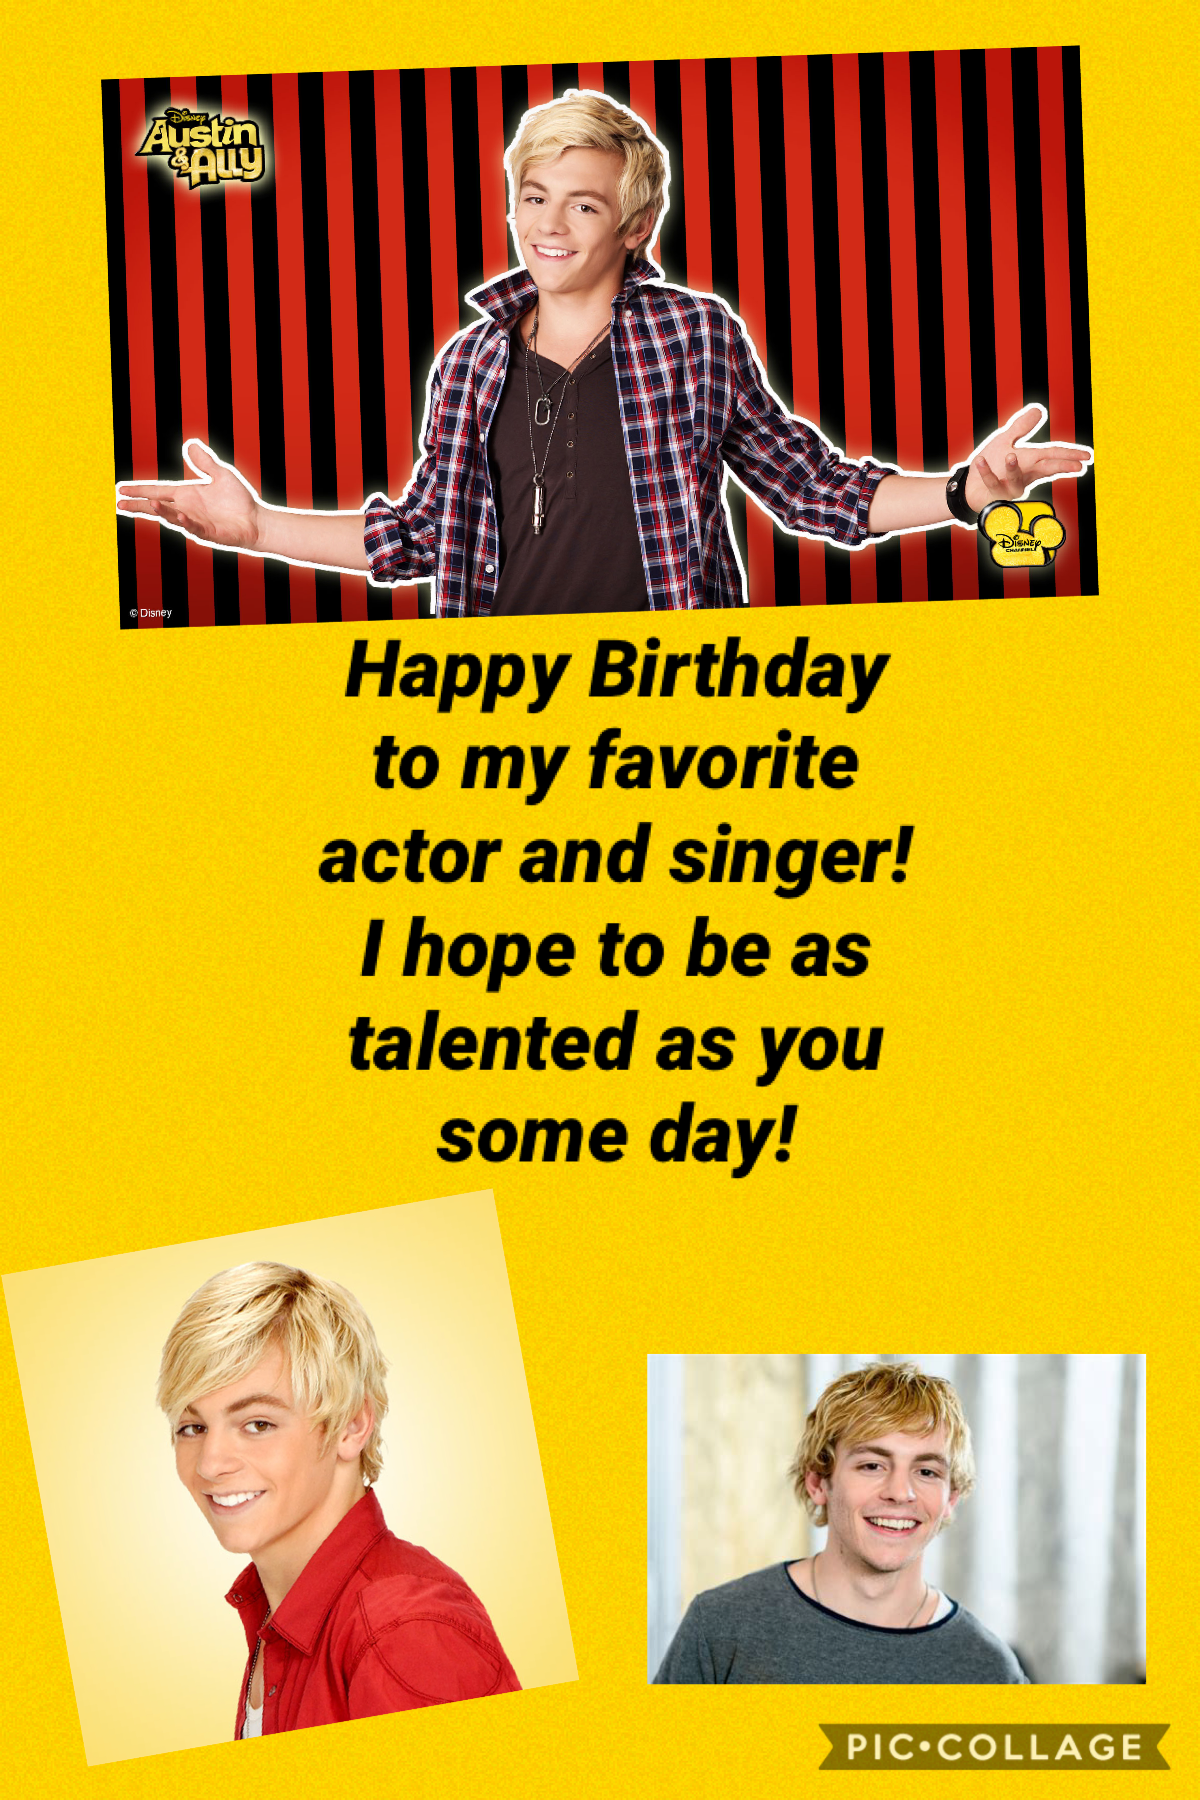 Ross Lynch has inspired me to want to do a lot of good things in life. I just wanted to wish him a happy 25 birthday!!! 